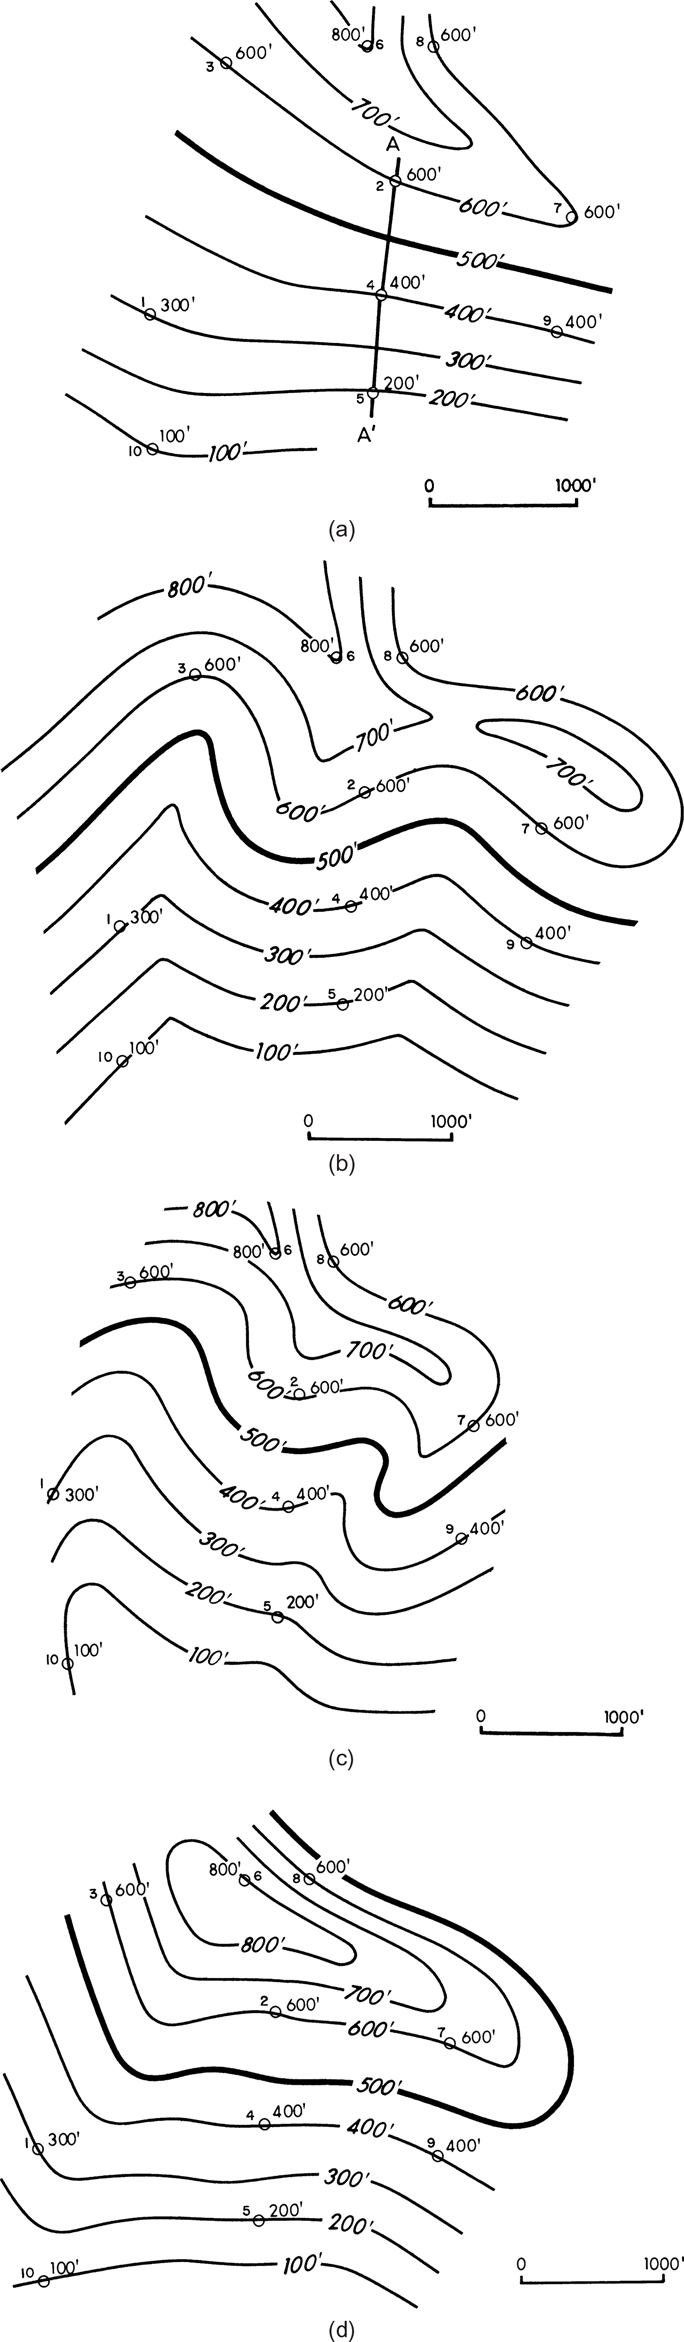 Four kinds of contouring techniques are presented.